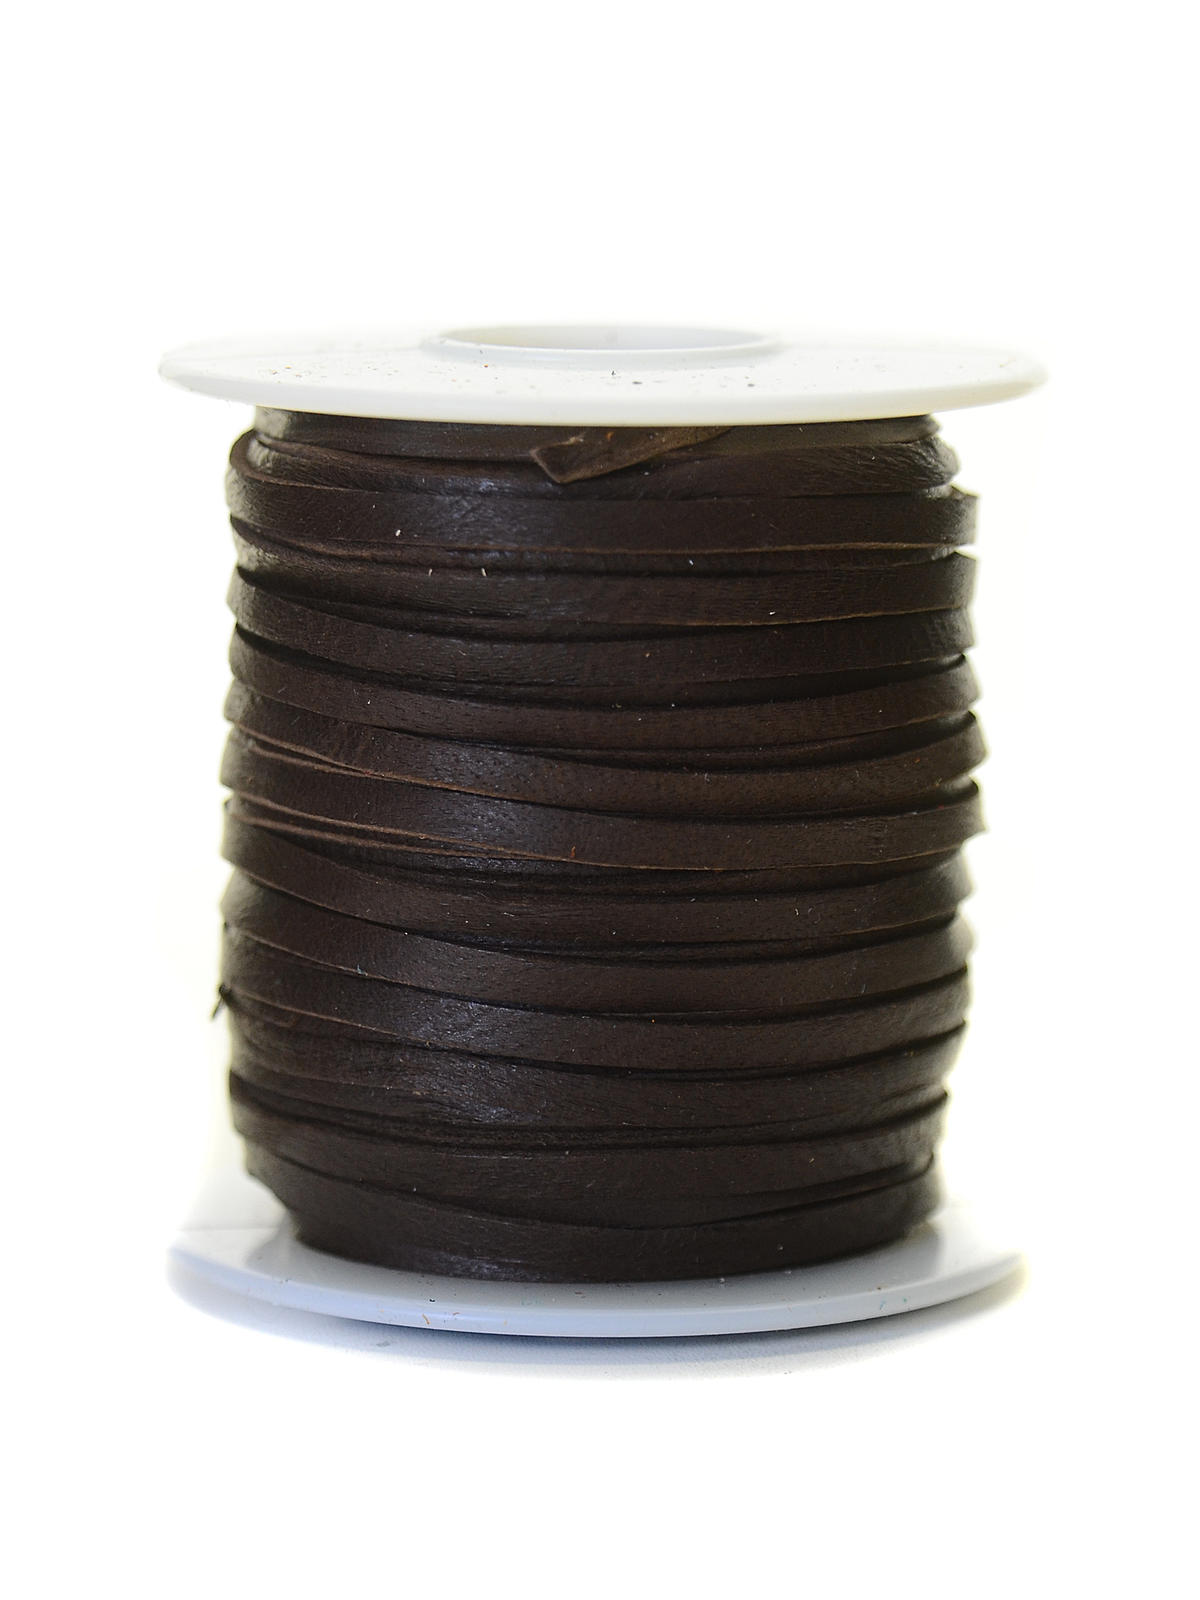 Realeather Deerskin Lace Chocolate 1 8 In. X 50 Ft. Spool